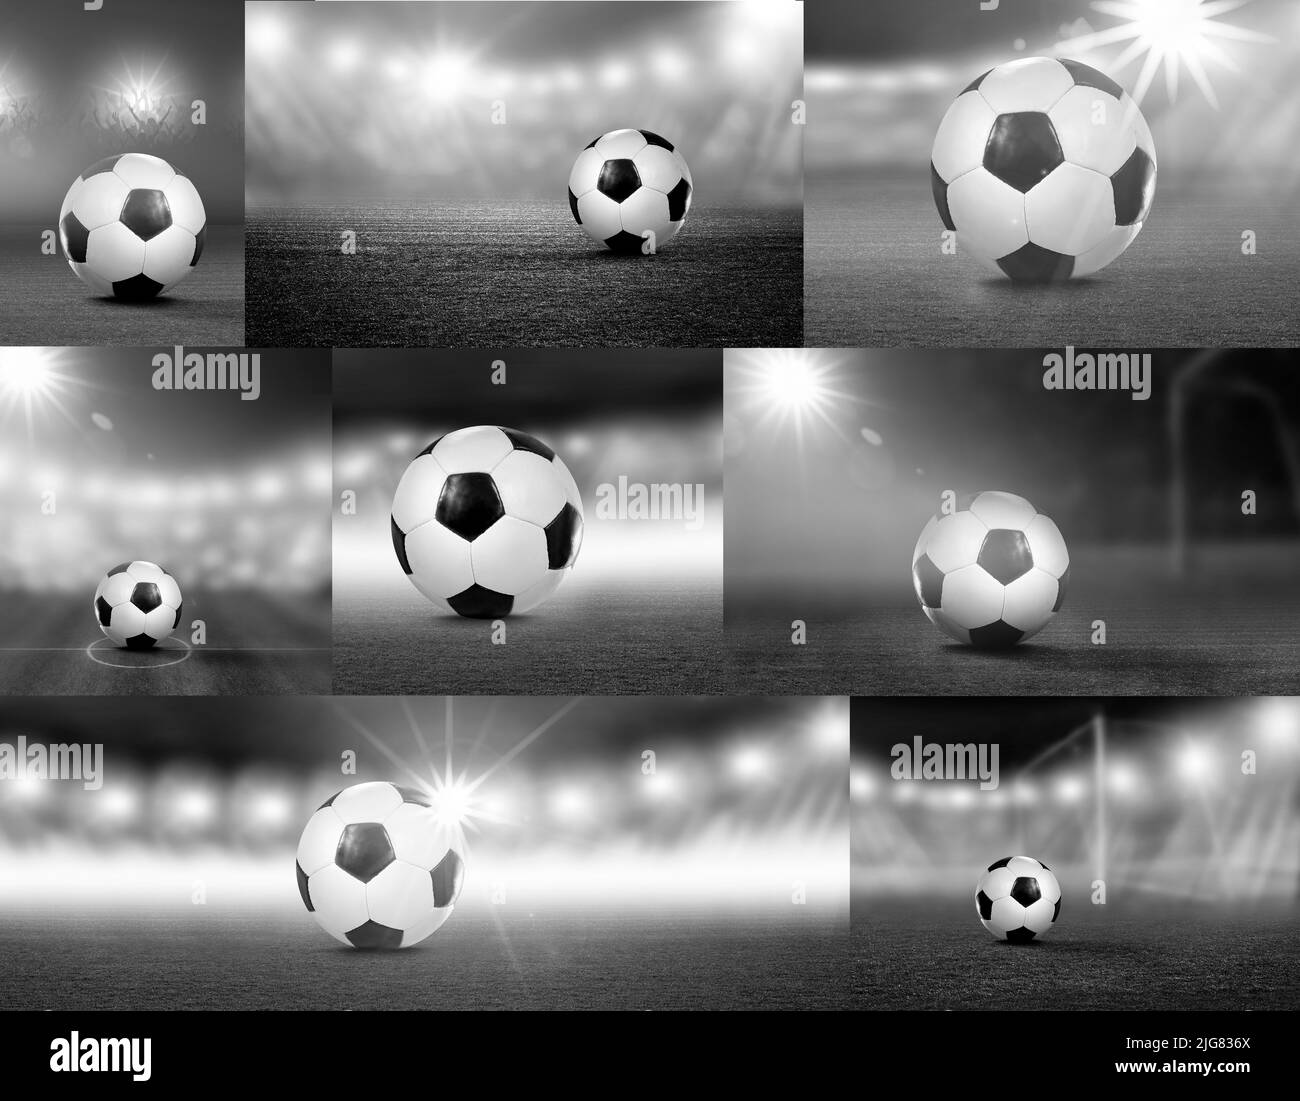 Different views of a soccer in the stadium Stock Photo